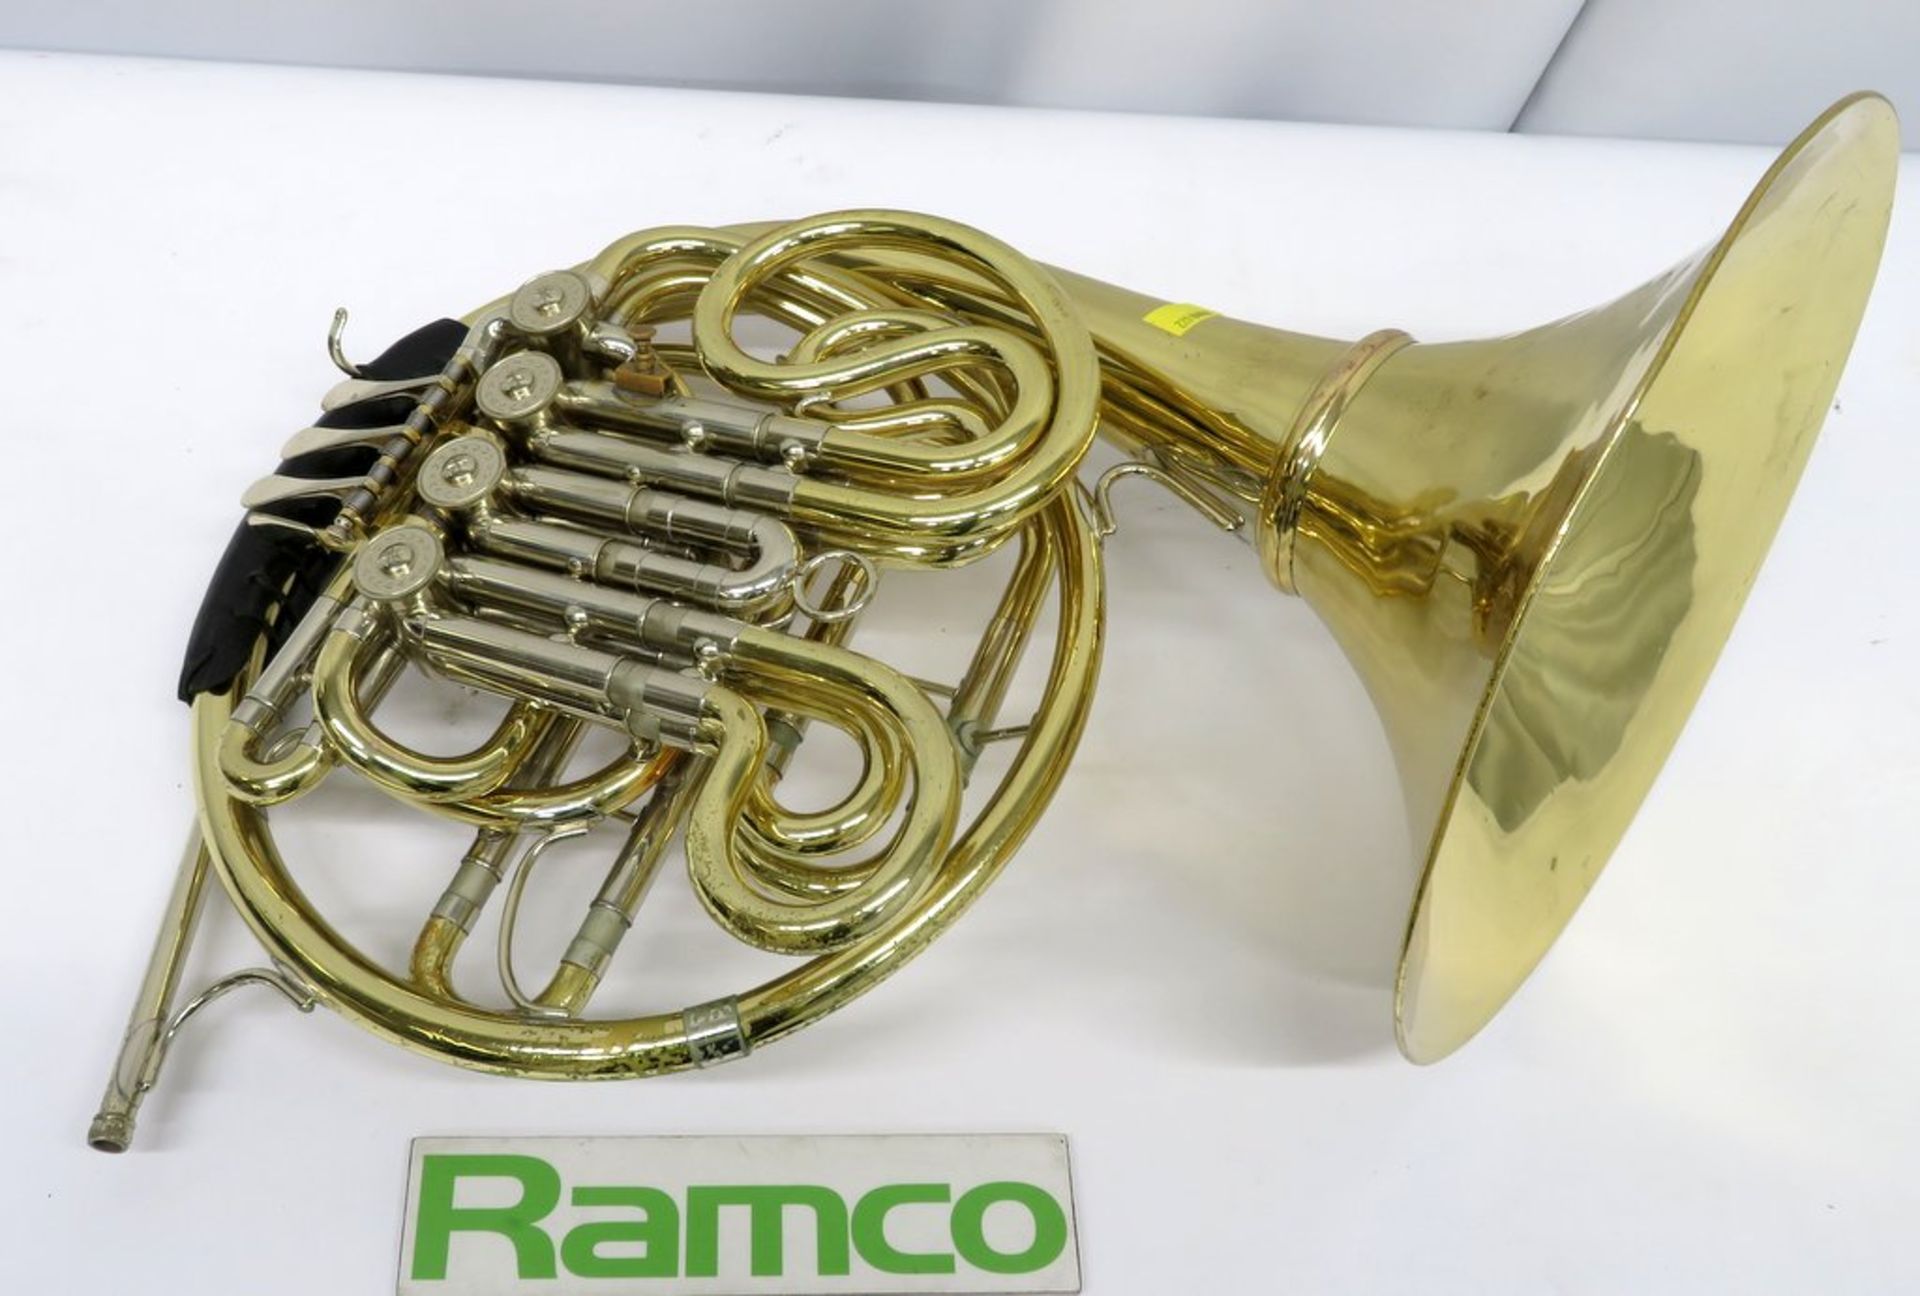 Paxman 25L Horn With Case. Serial Number: 4800. Please Note This Item Has Not Been Tested - Image 5 of 19